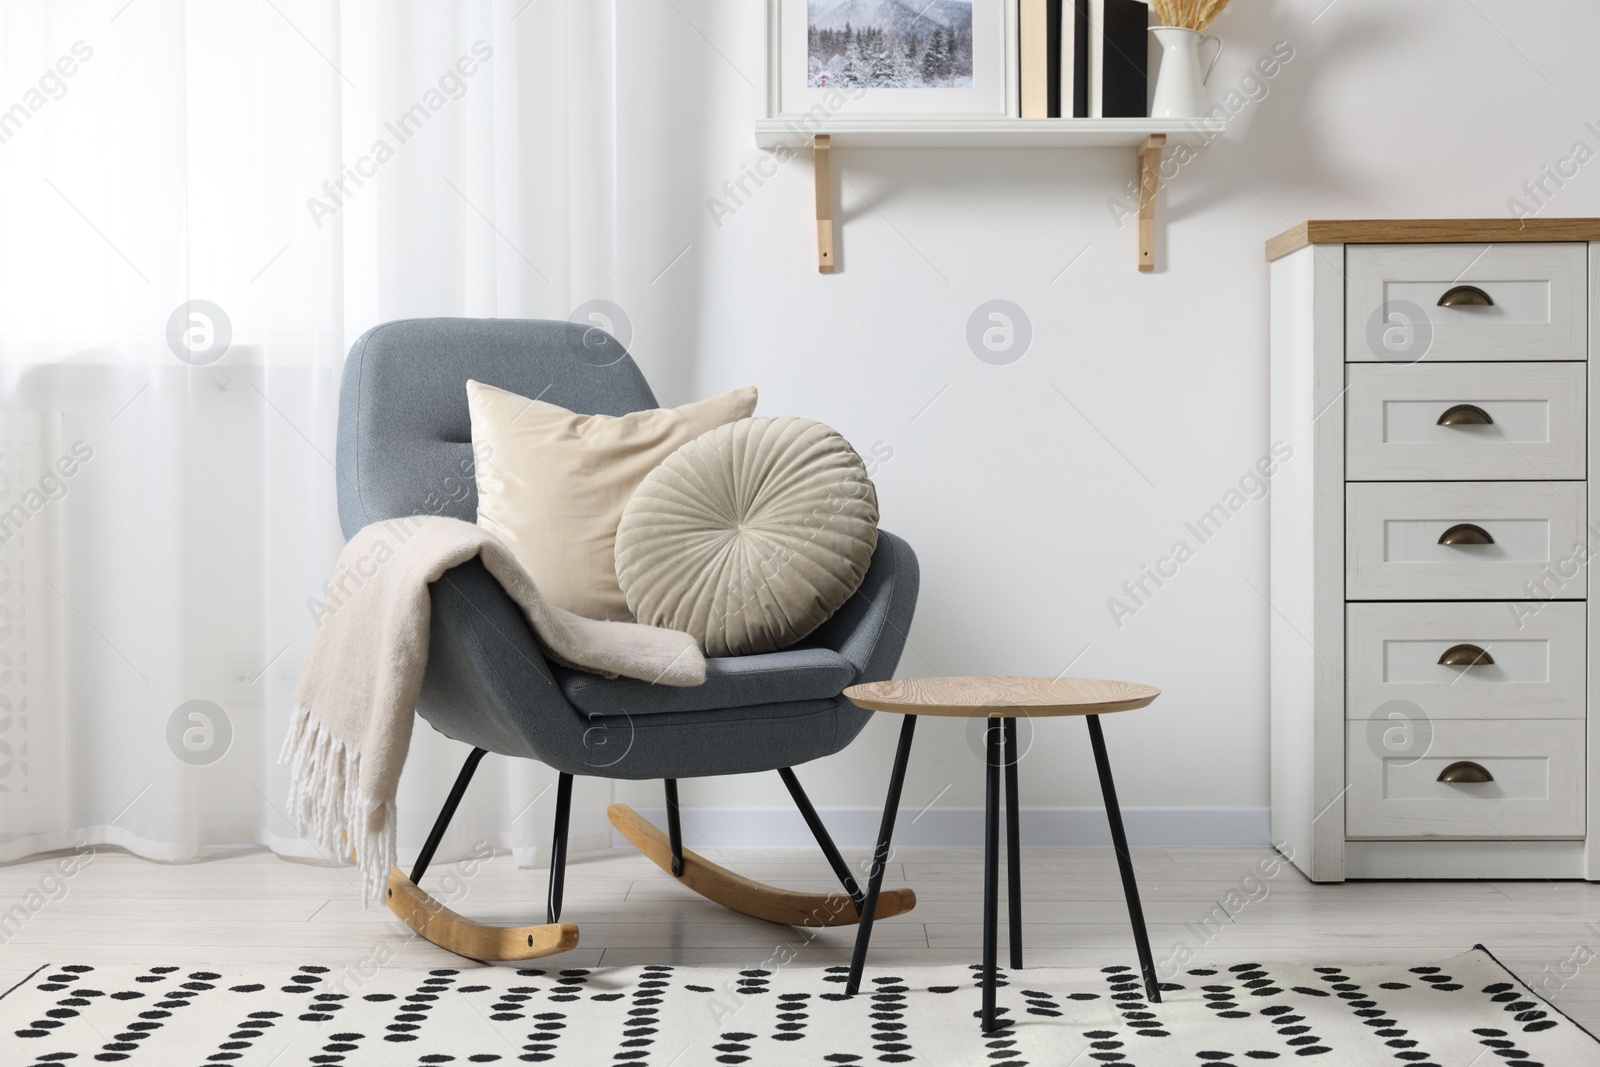 Photo of Soft pillows and blanket on rocking armchair indoors